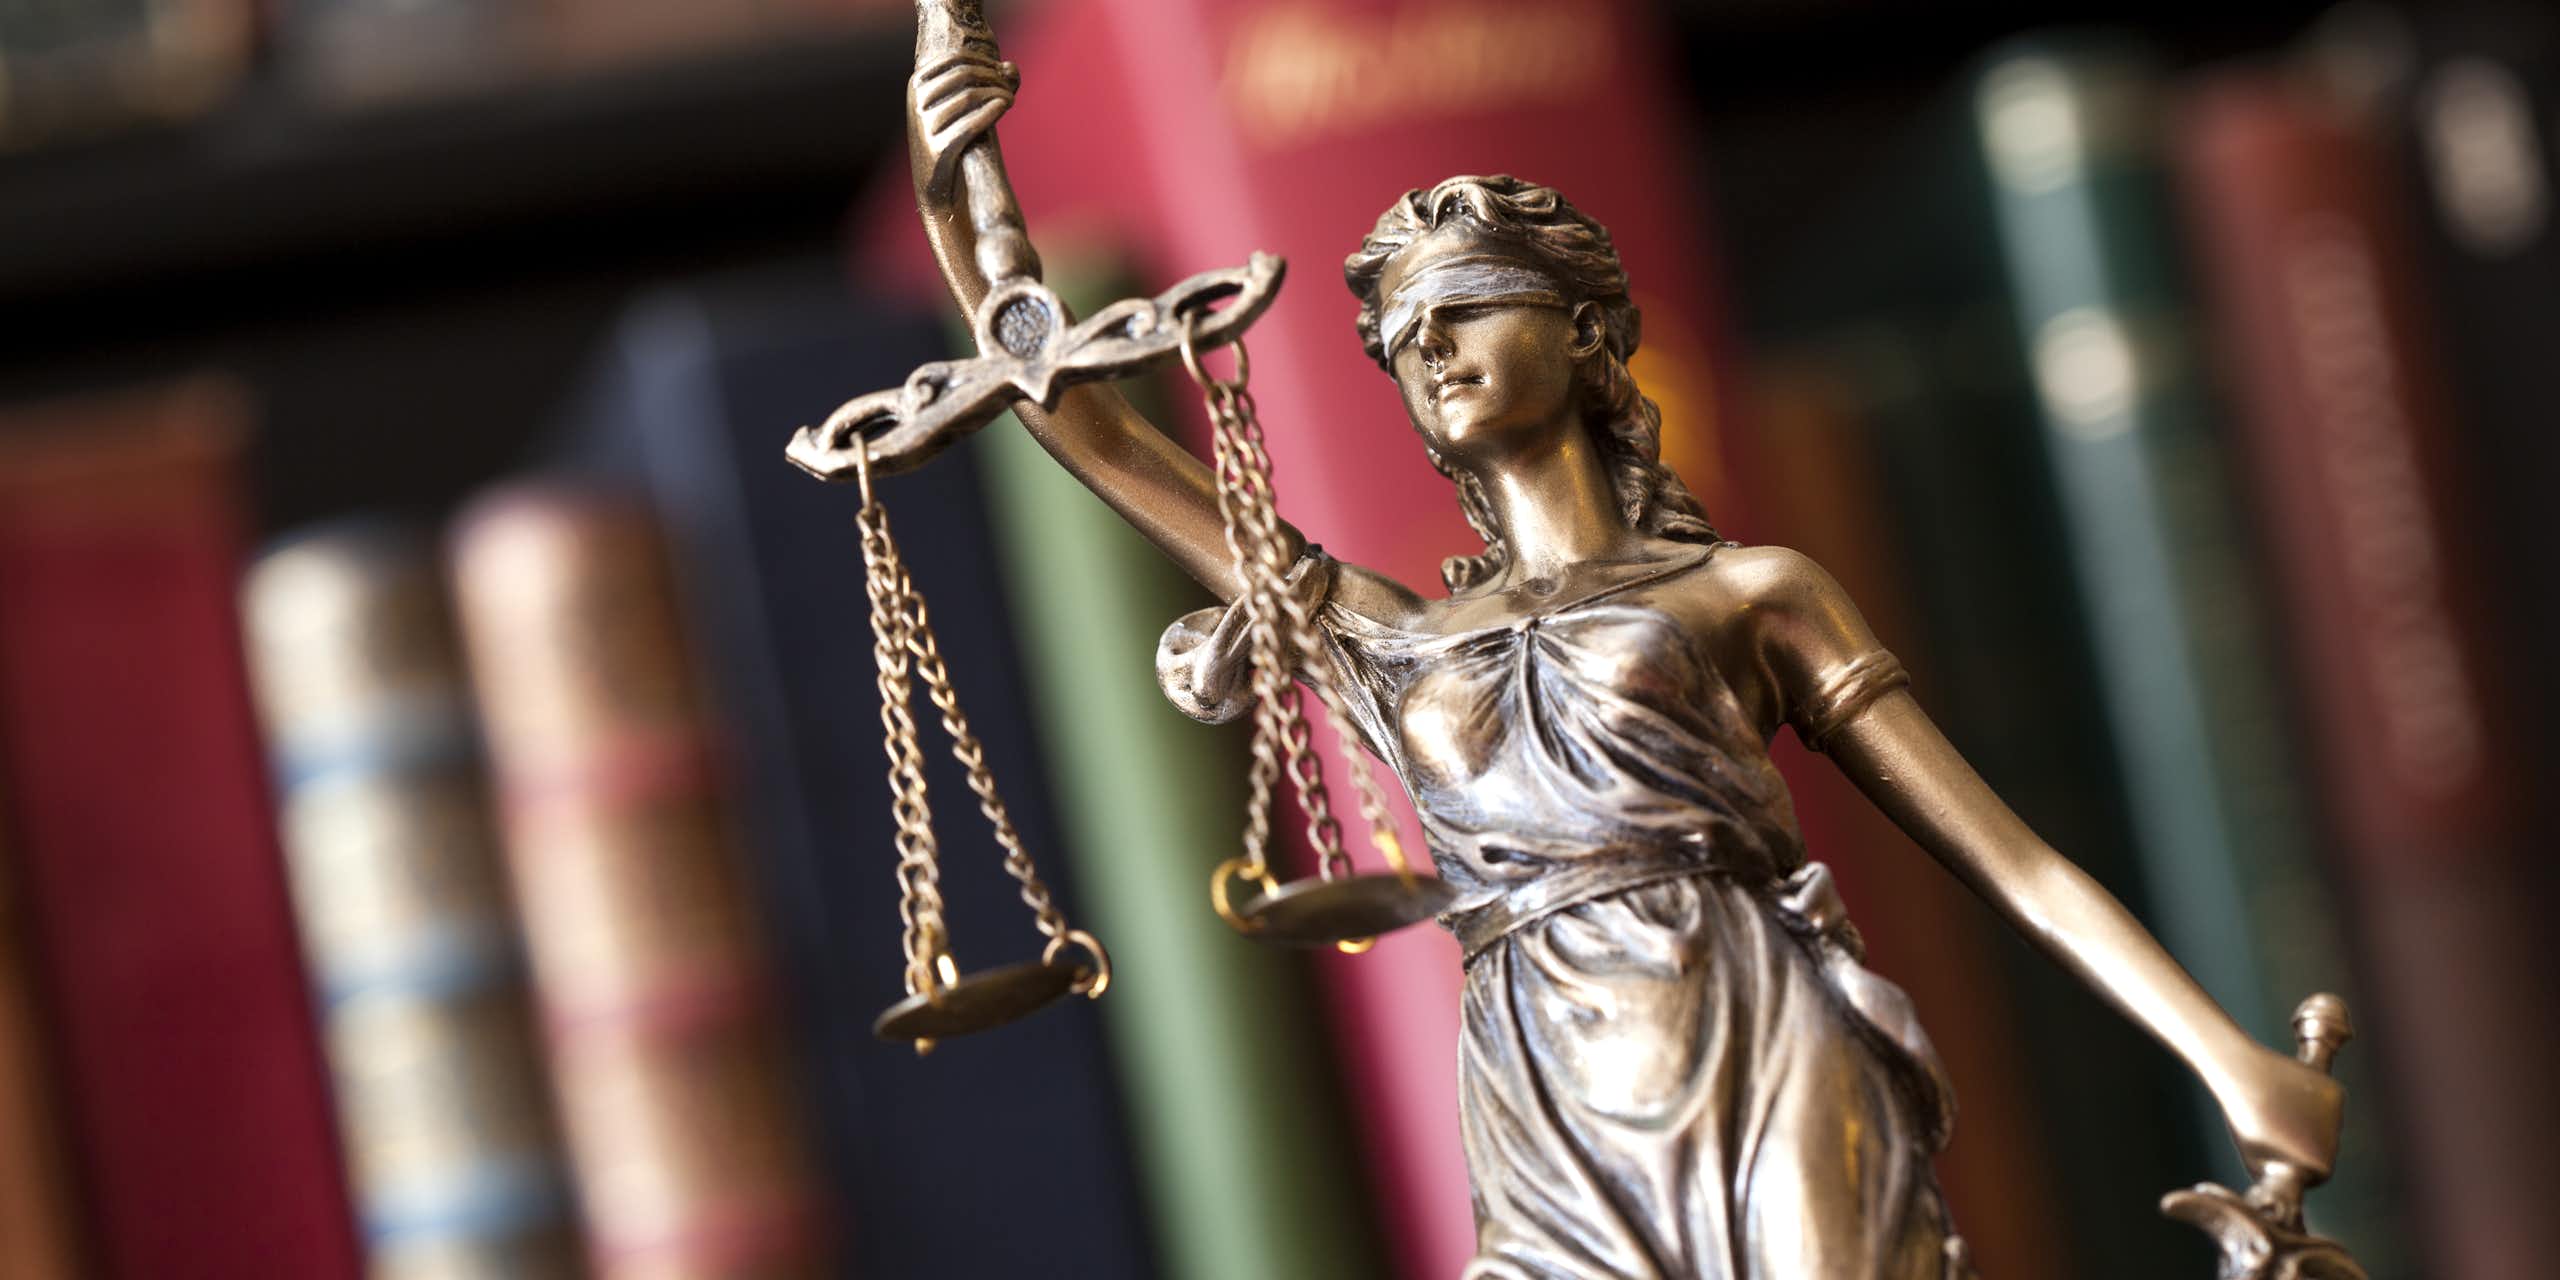 Small statue of Justice holding a set of scales, with an out of focus bookshelf in the background